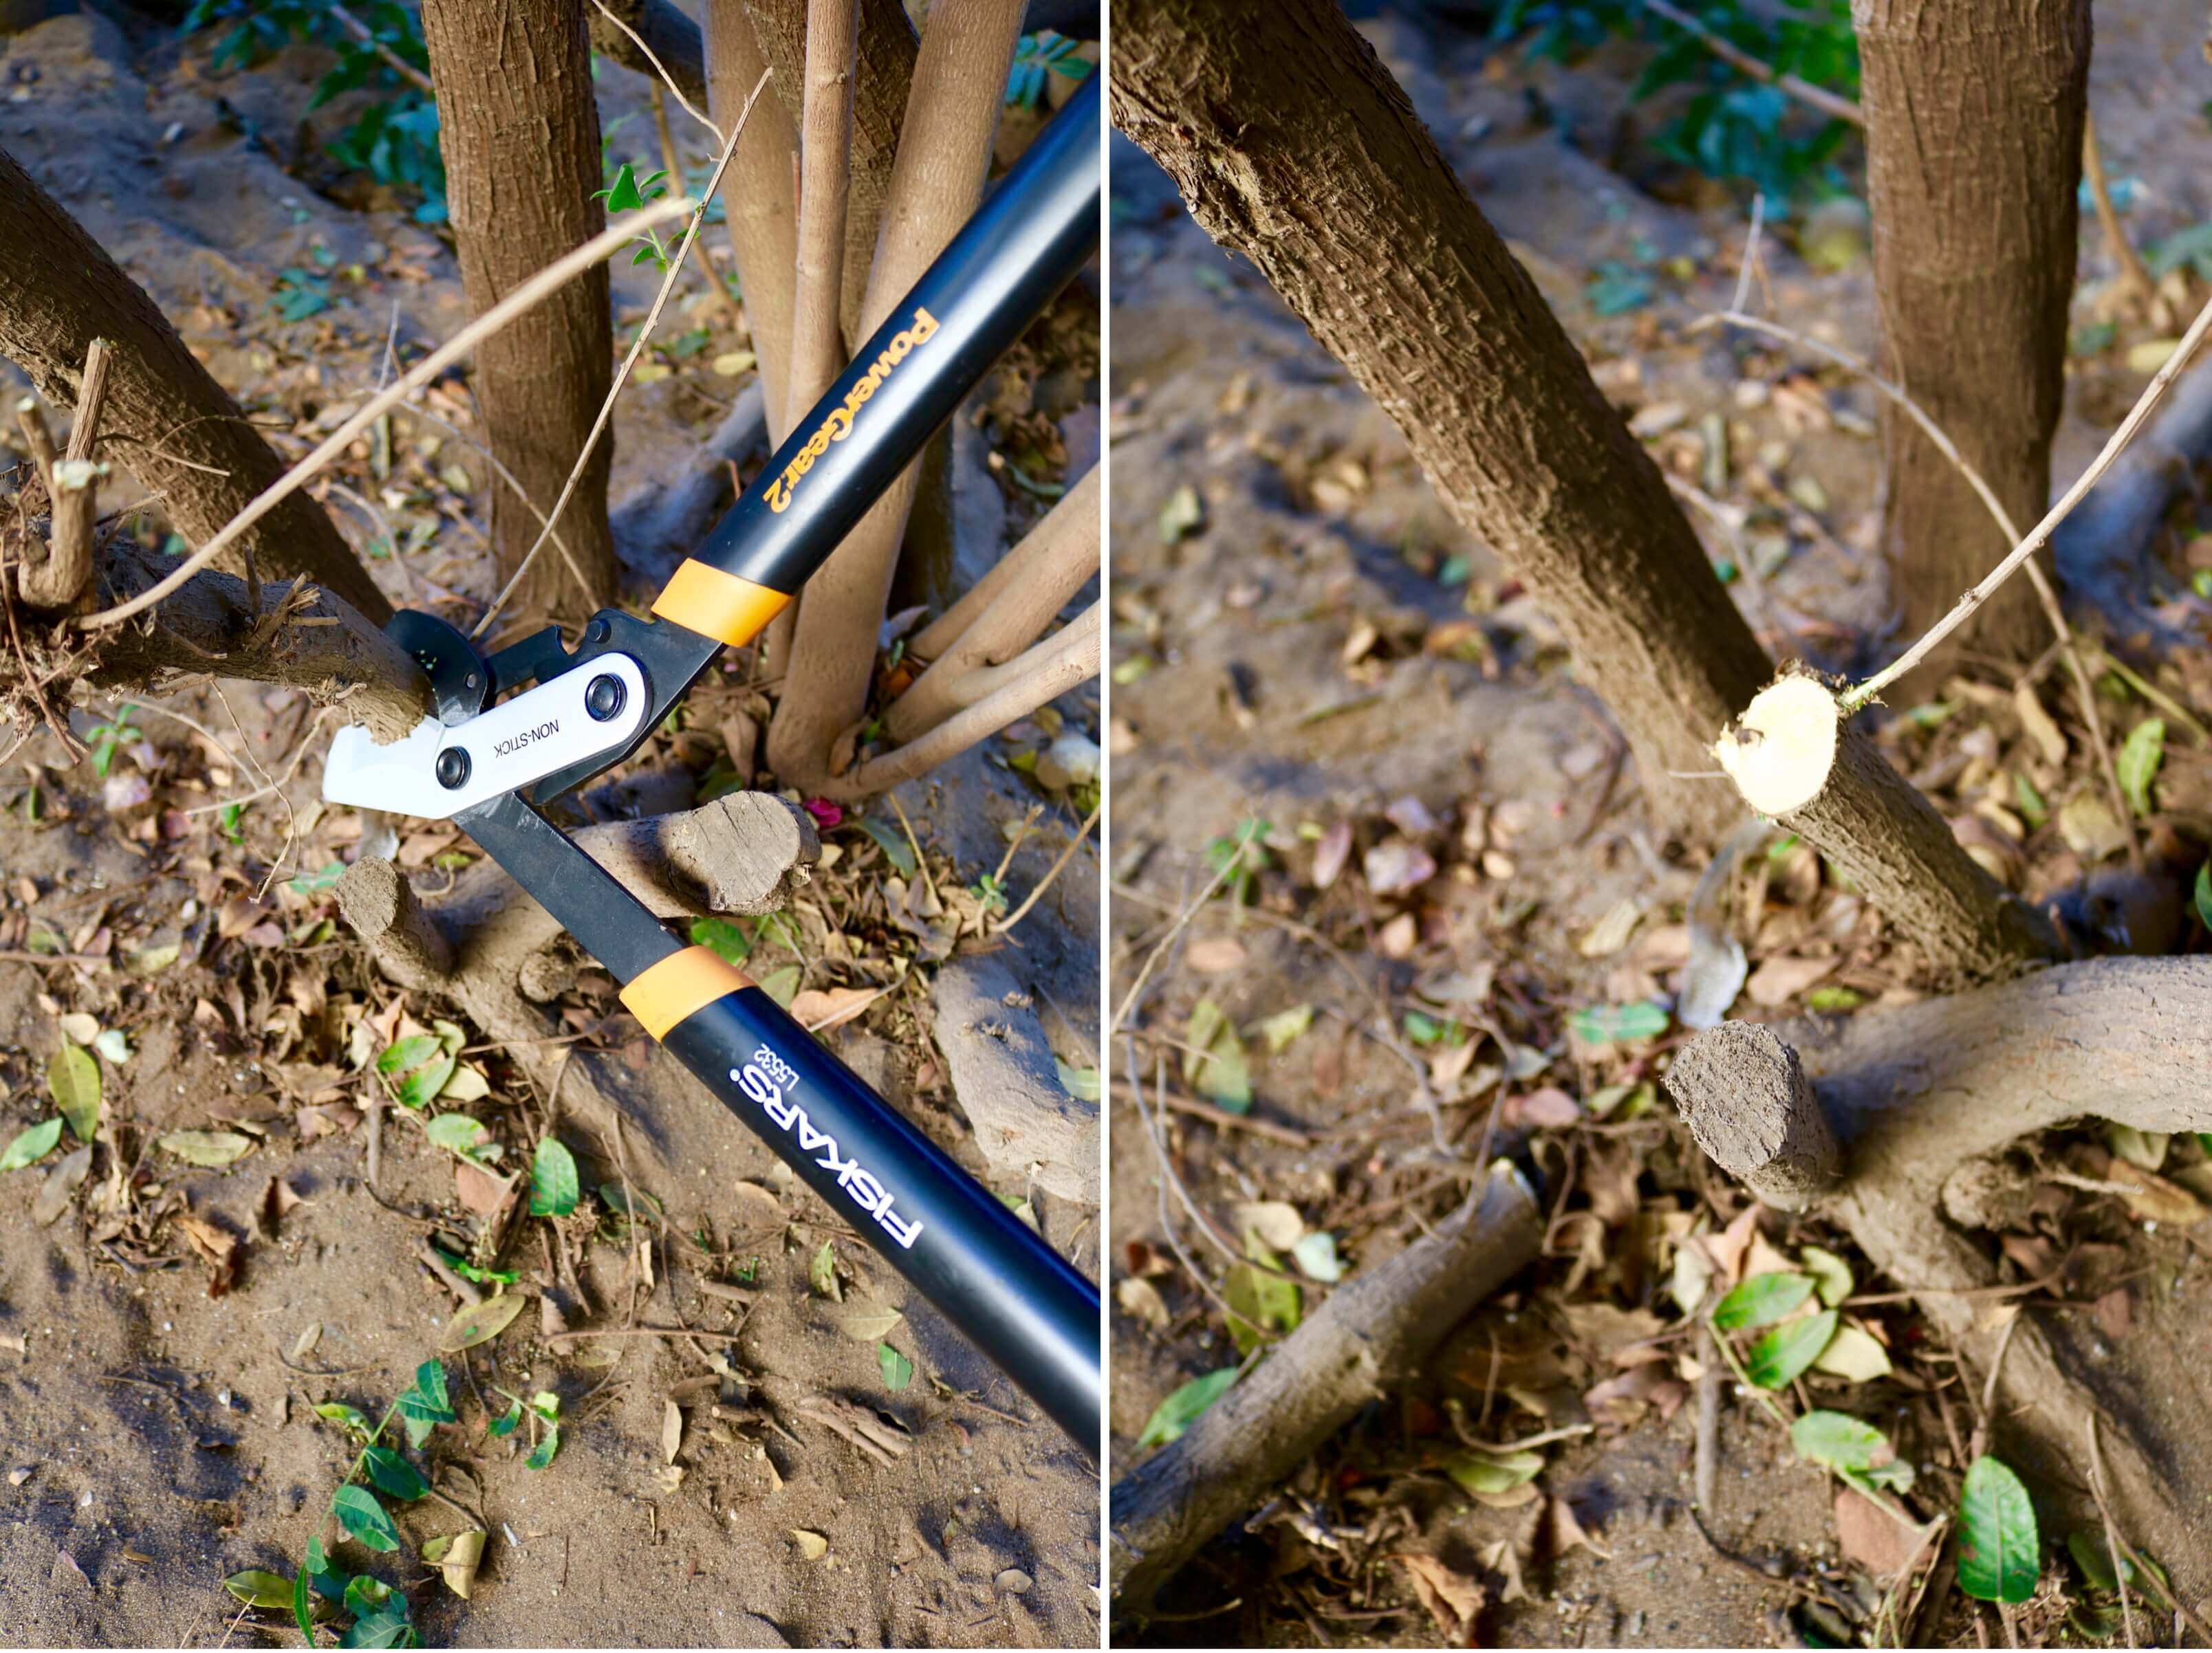 32" PowerGear2 Lopper cutting a thick branch with ease